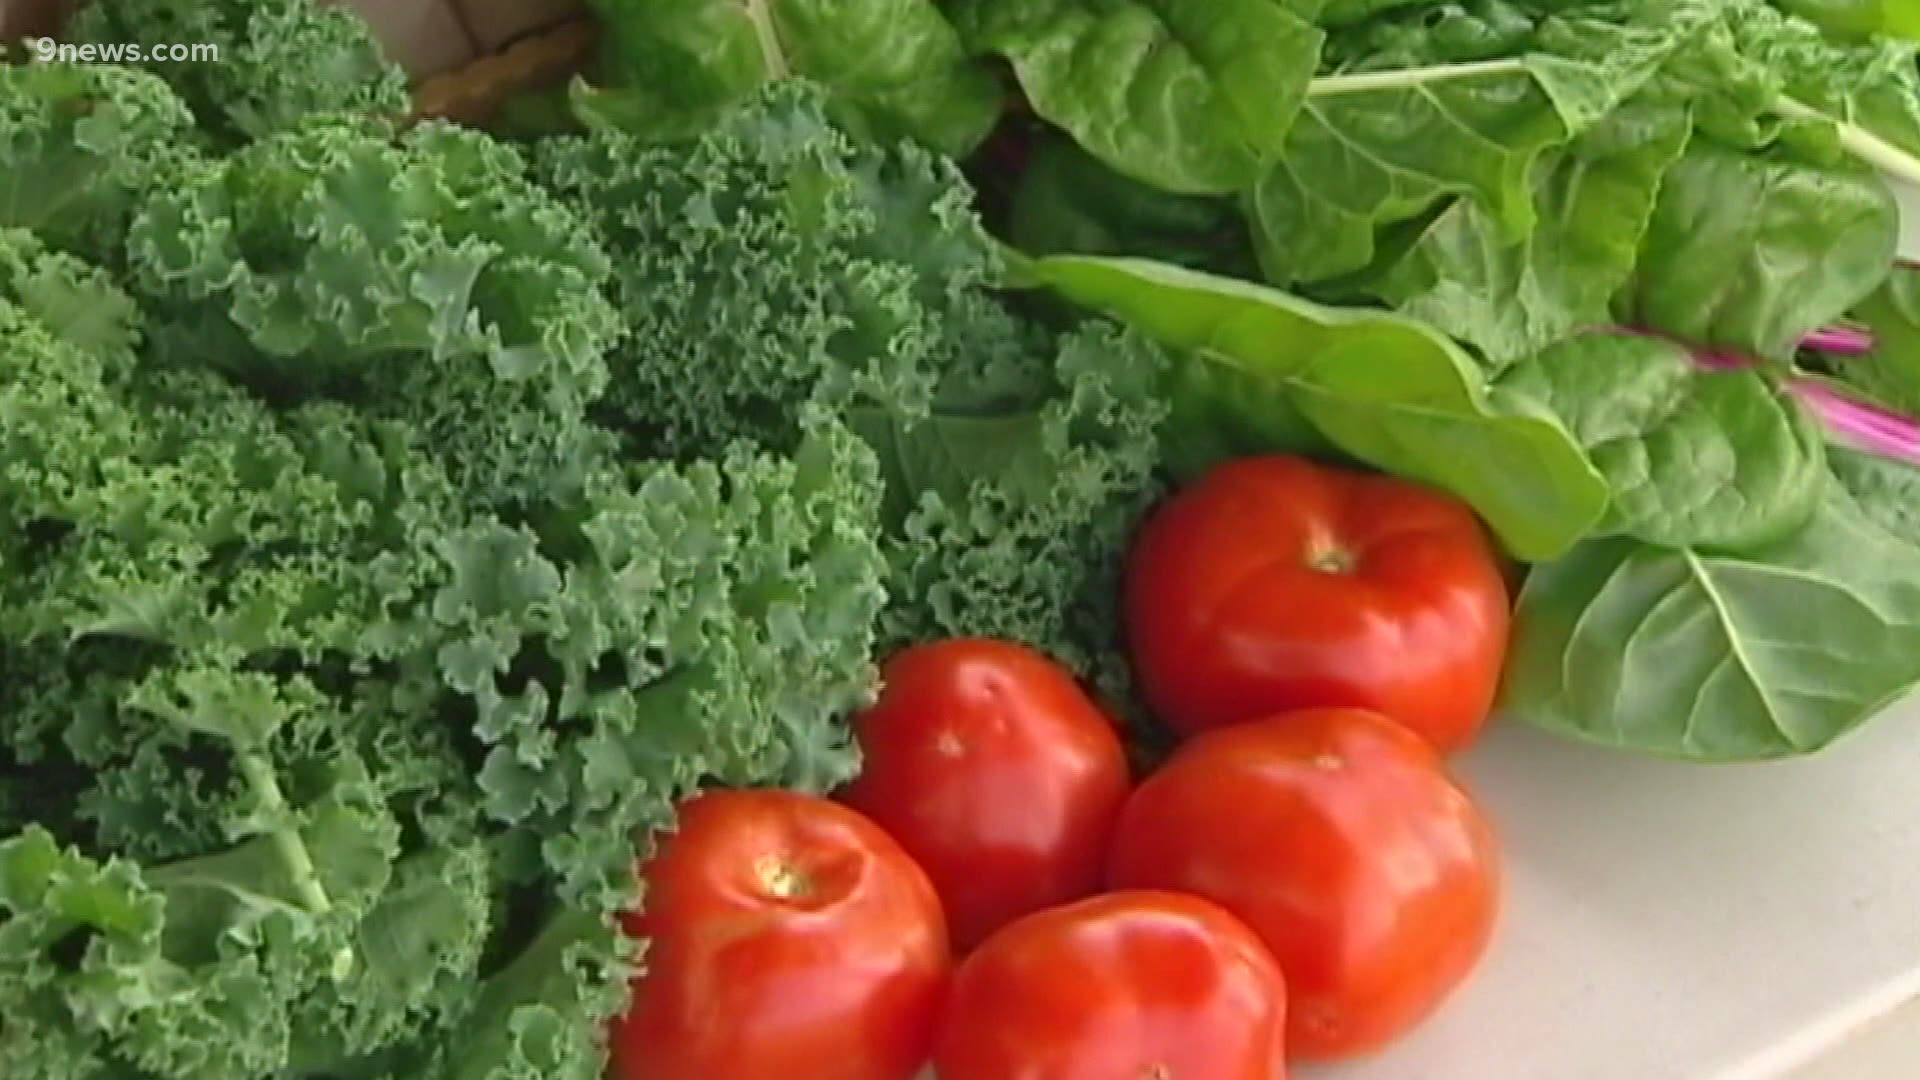 9NEWS Nutritionist Regina Topelson says a plant-based diet has many health benefits.